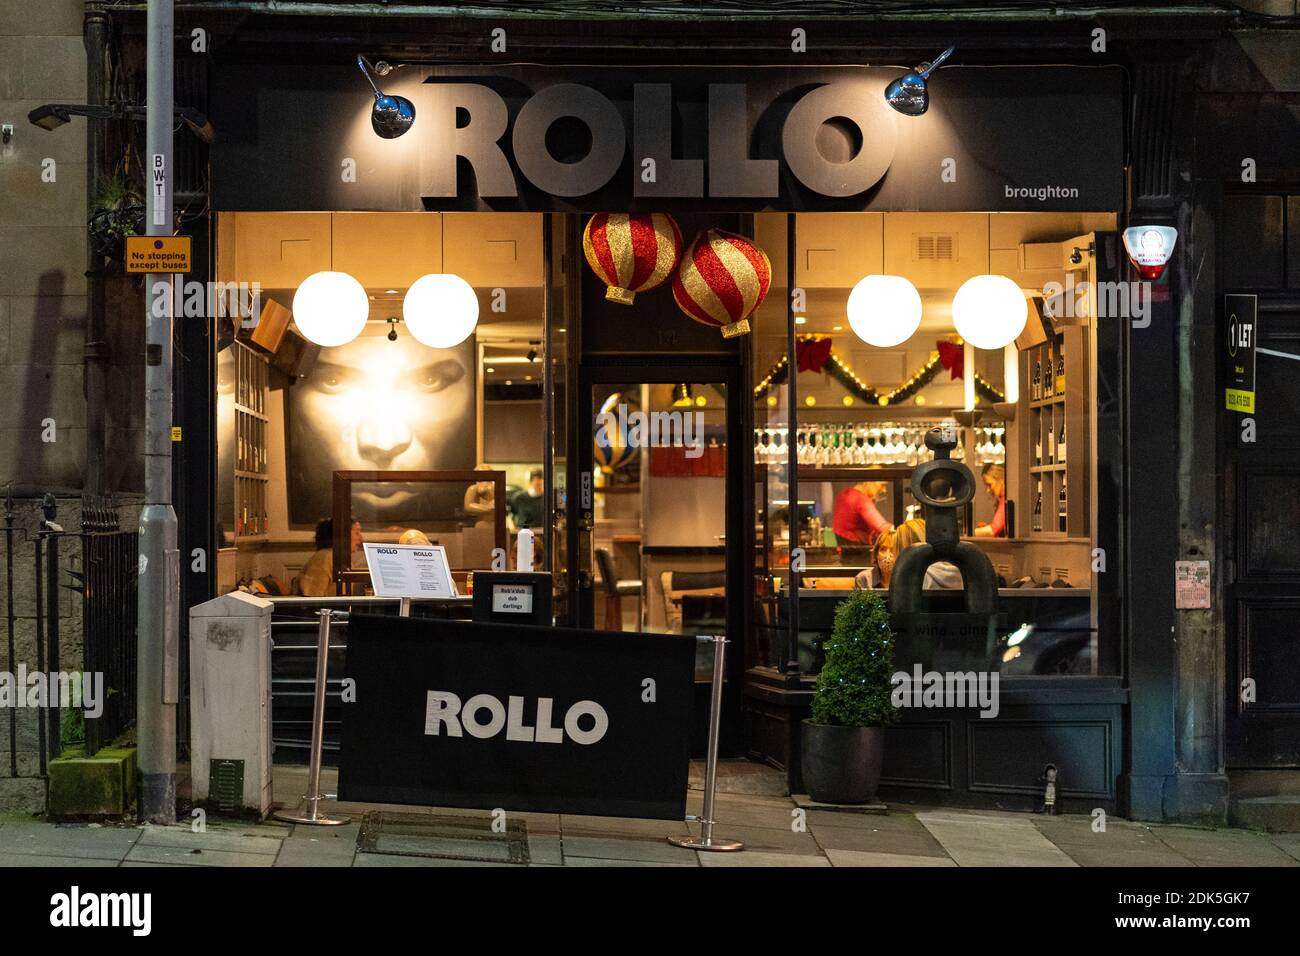 Edinburgh, Scotland, UK. 14 December 2020. City of Edinburgh controversially remains in Level 3 of lockdown meaning bars and restaurants must close at 6pm and not sell alcohol. Most bars have chosen to remain closed, Tuesday will see Scottish Government announce if the city will relax lockdown to level 2 or remain at level 3. Pic; Rollo bistro on Broughton Street. Iain Masterton/Alamy Live News Stock Photo